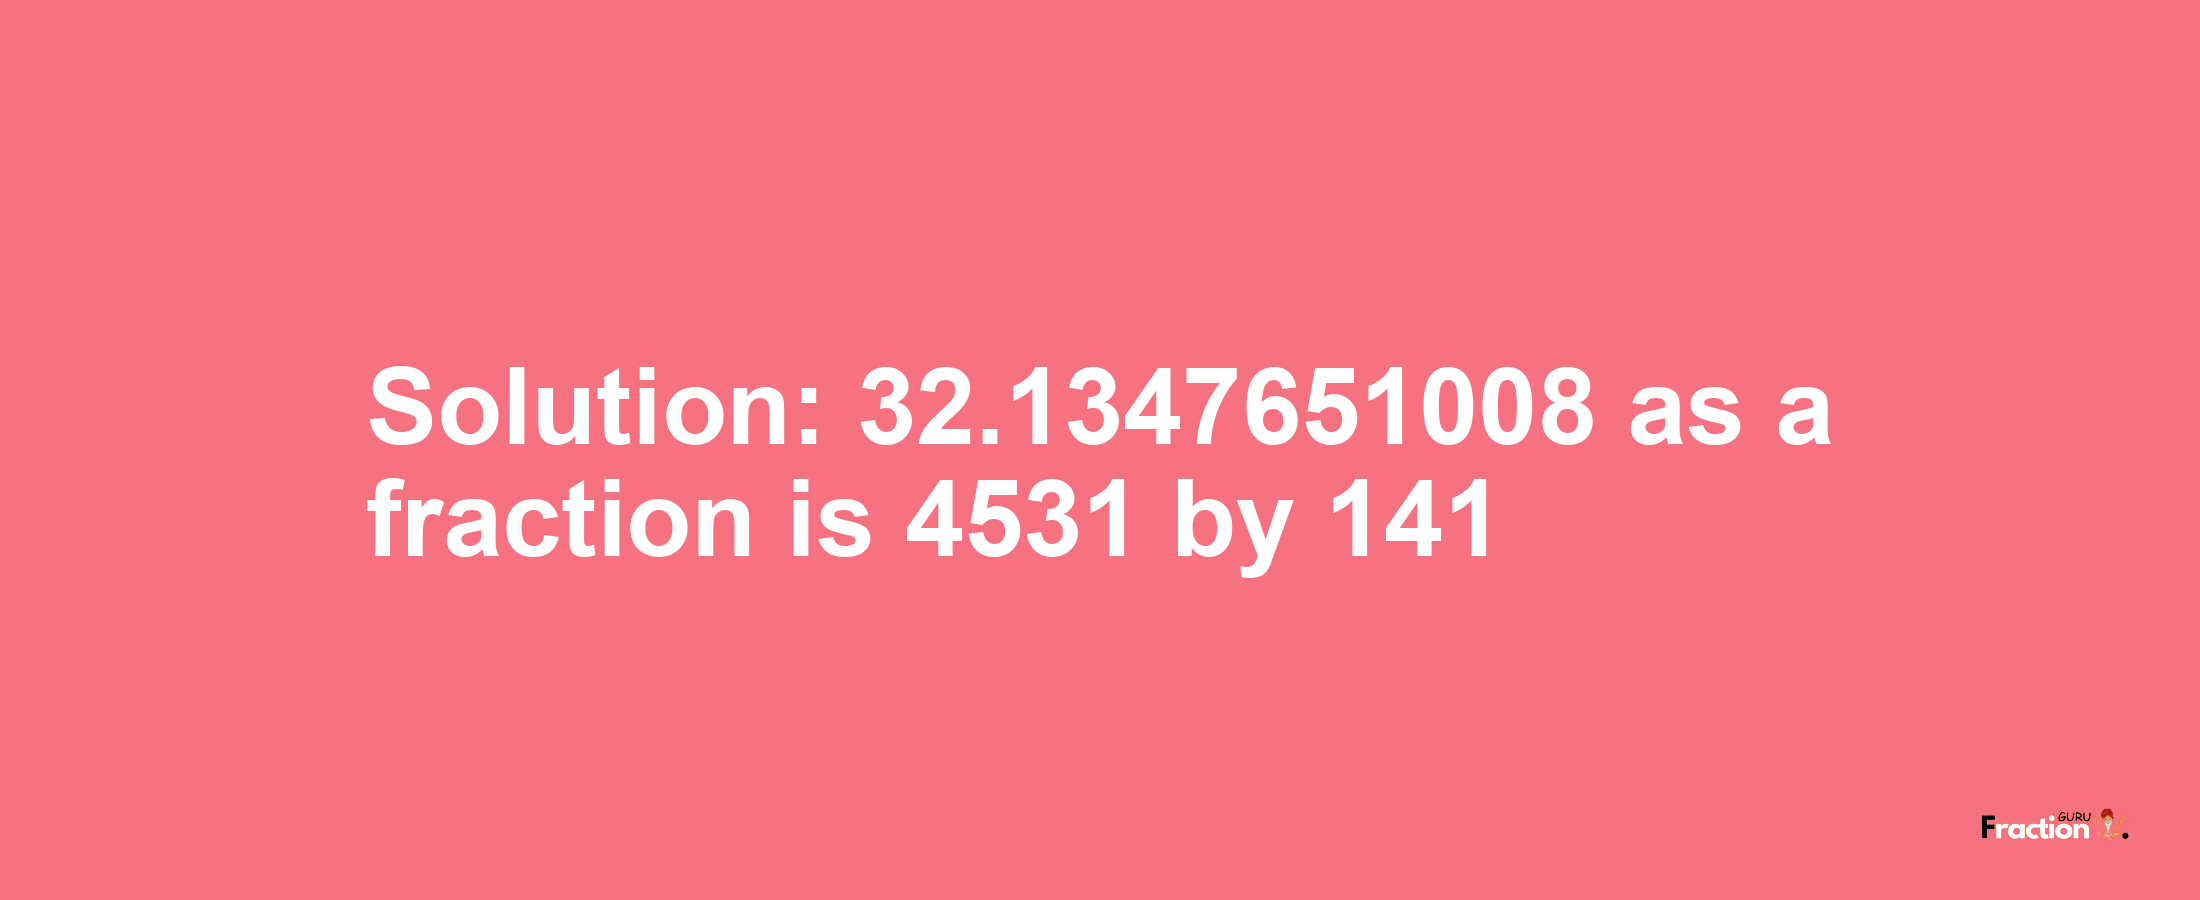 Solution:32.1347651008 as a fraction is 4531/141